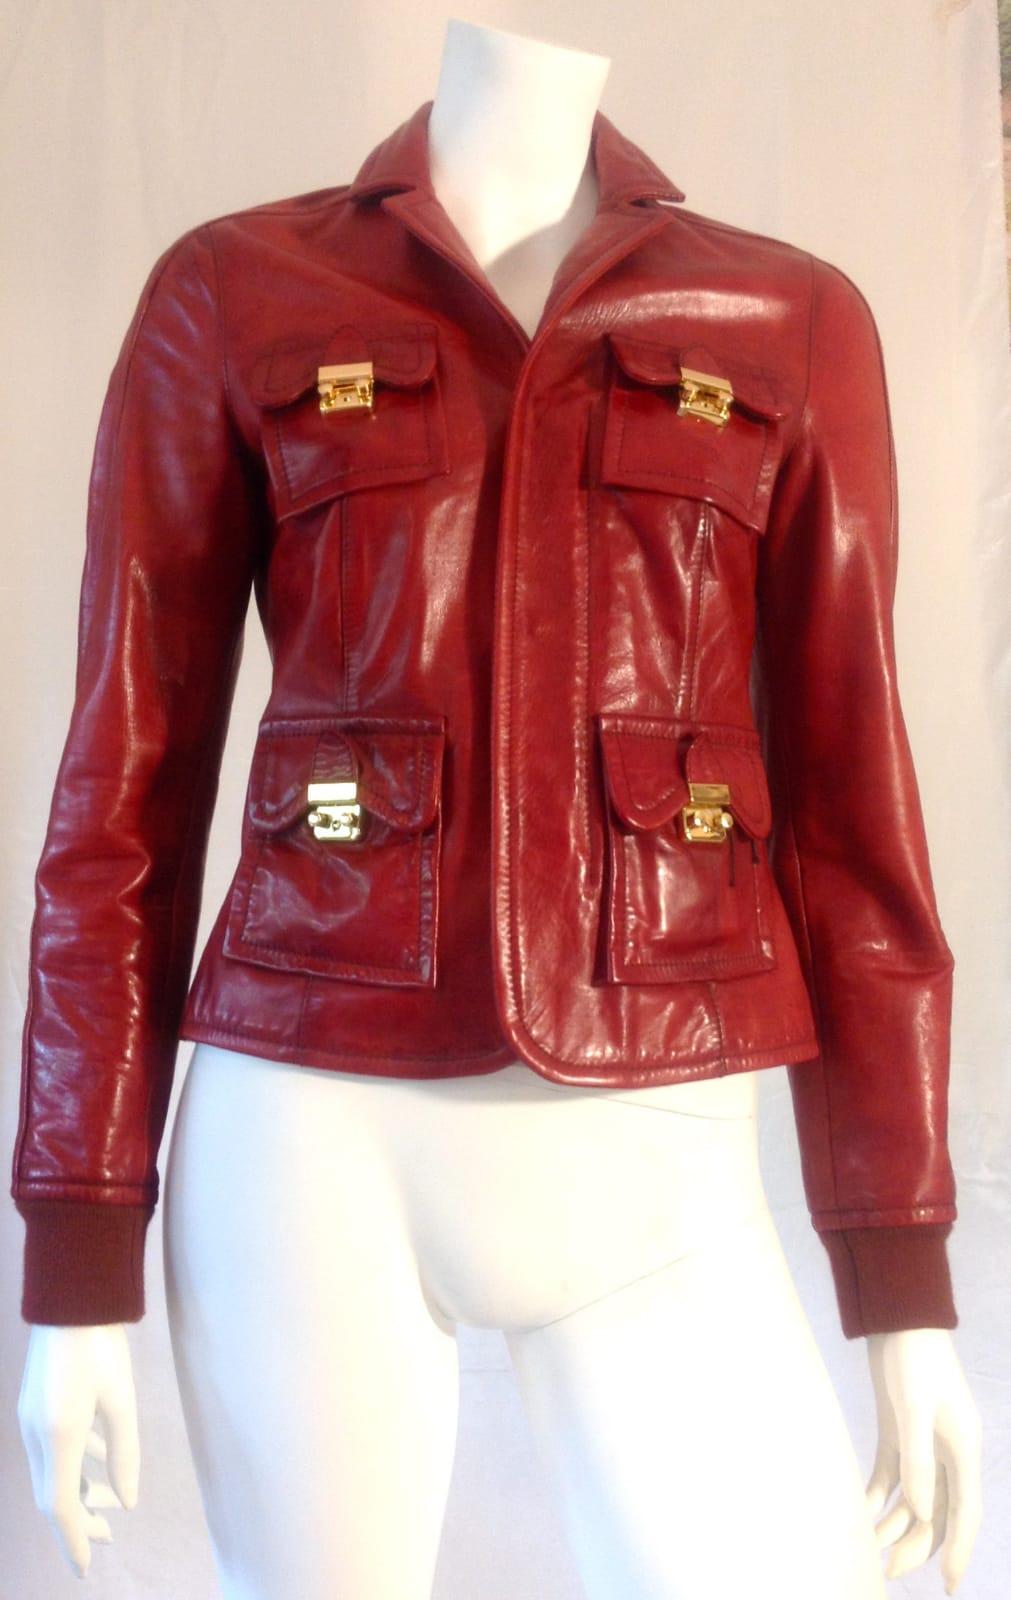 Leather, front closure with zip and snap buttons, red color, with pockets, long sleeves, revers neckline, lined.

The peculiarity is the front pockets with lockable openings.

Composition: 

Jacket: 100% calf leather 
Lining: 55% cotton, 45%